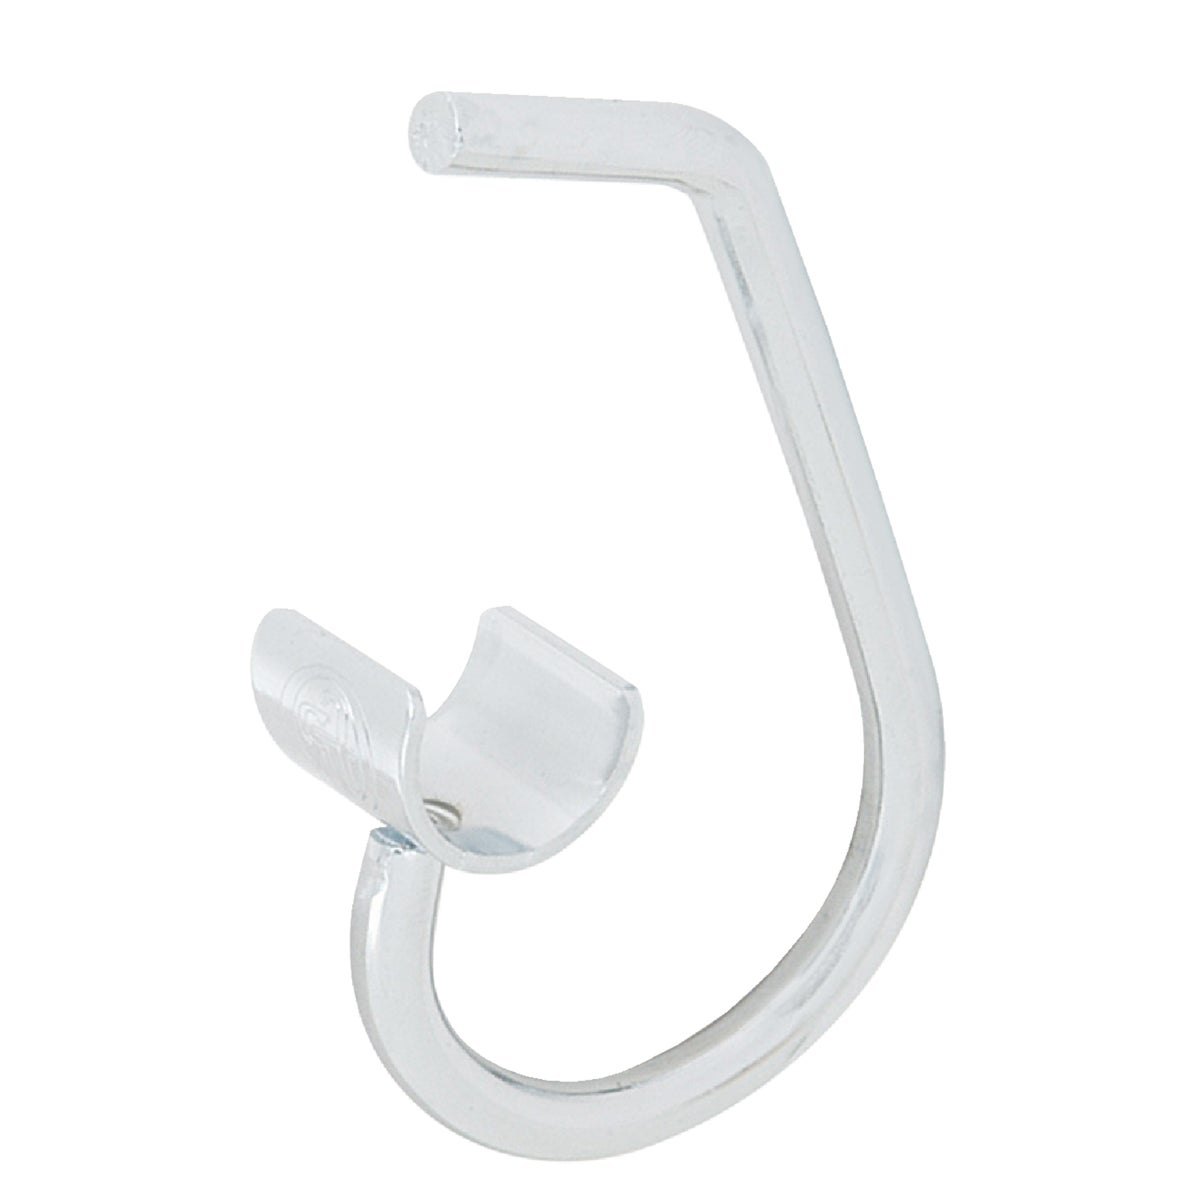 Item 201553, The rod clip supports the chrome rod under the ventilated shelf bracket.